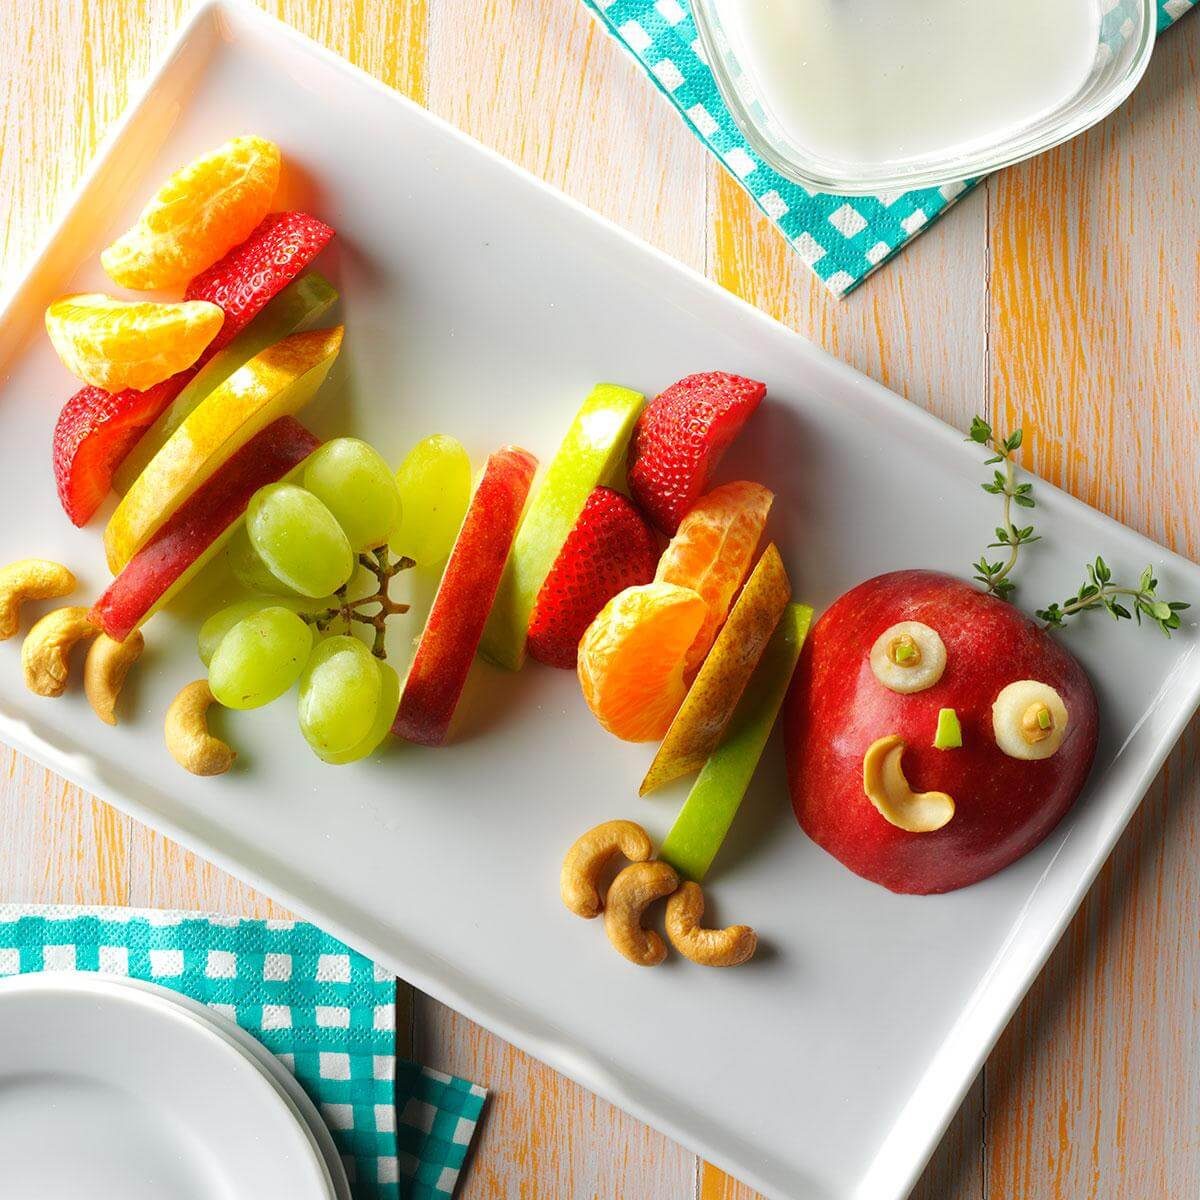 41 Easy, Fun Healthy Snack Ideas For Kids